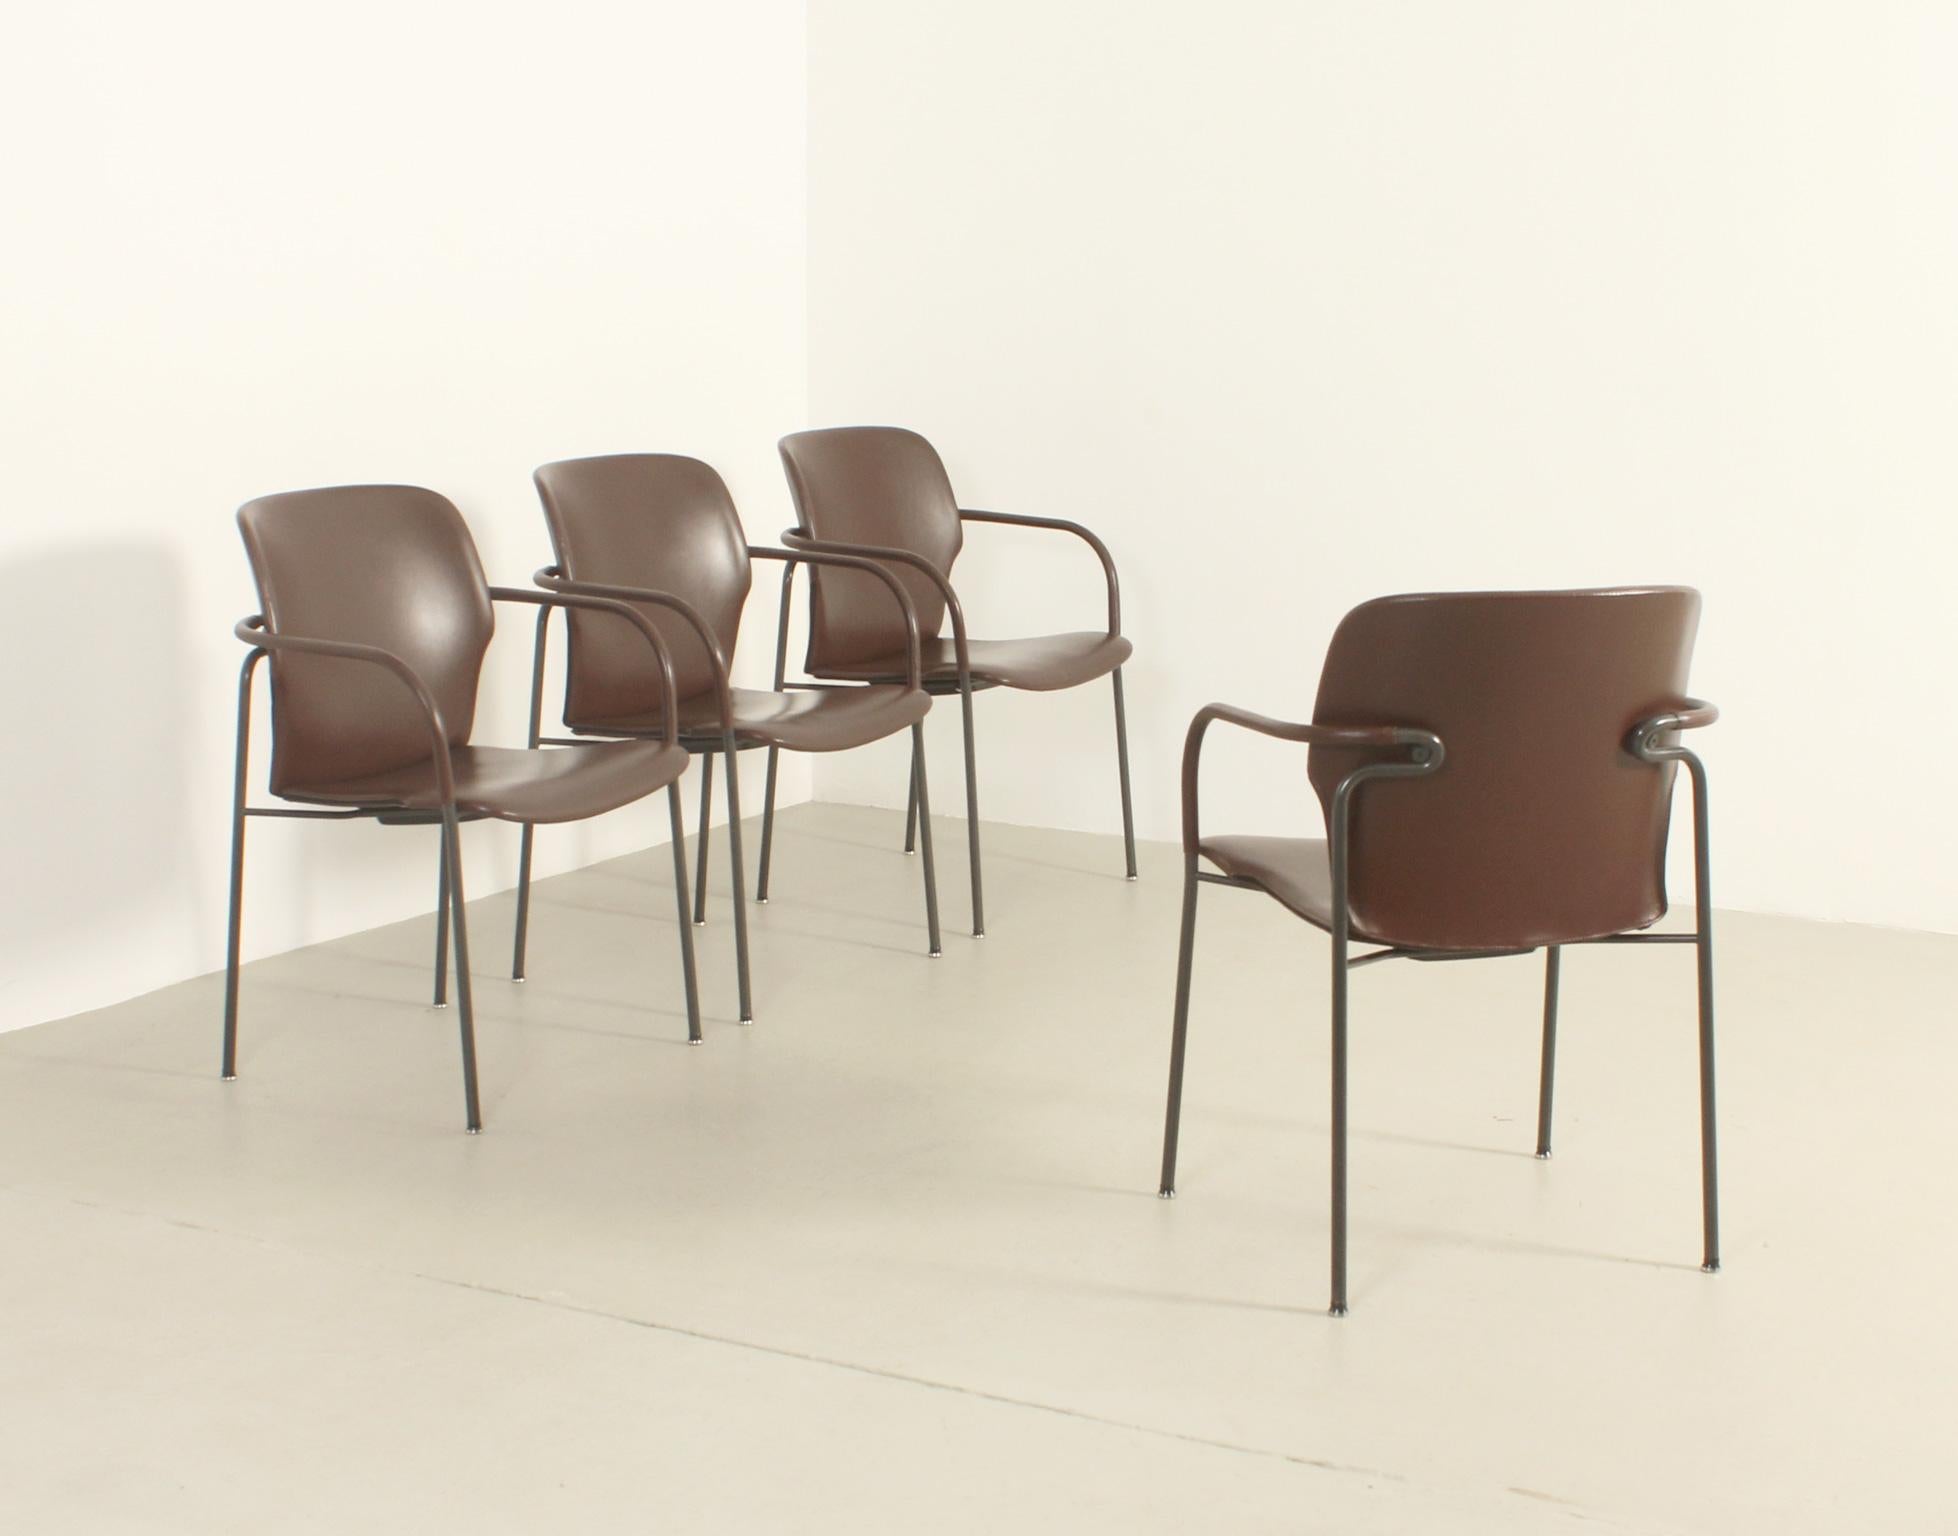 Set of four Lalanda chairs designed in 1980's by the Italian architect Gianfranco Frattini for the Spanish company Kron, Madrid. Metal structure lacquered and covered in brown leather.